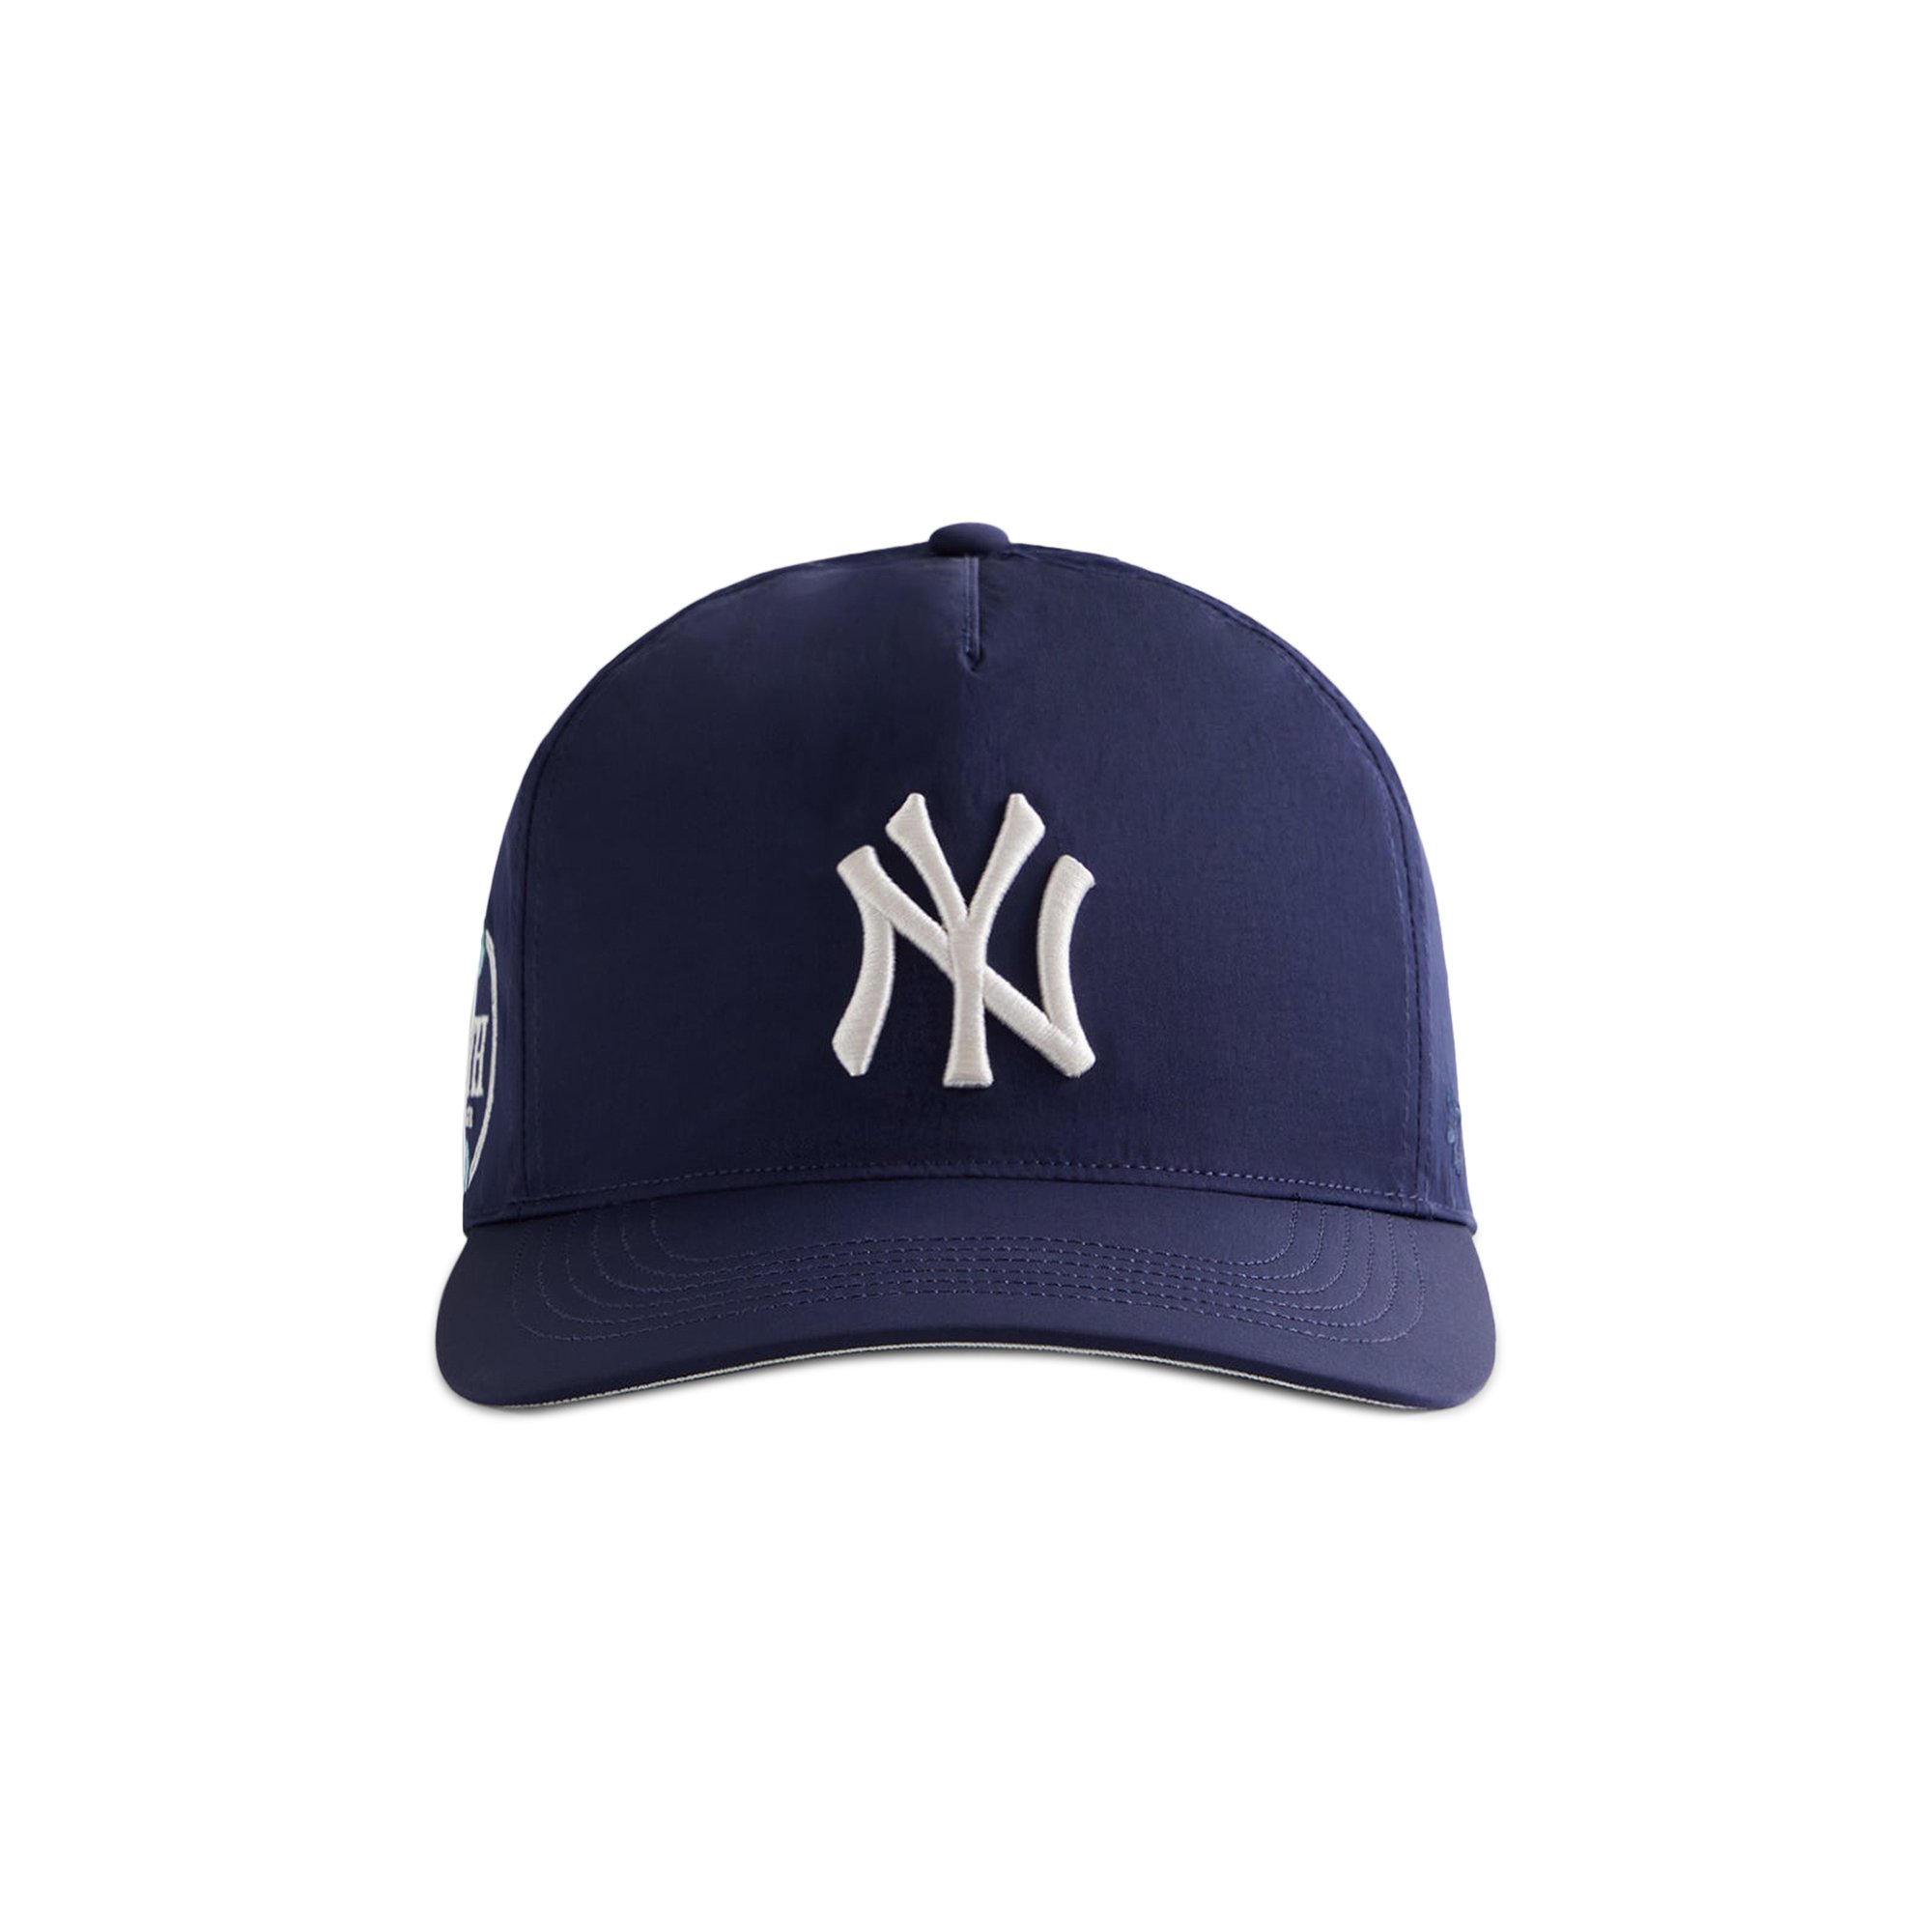 Kith For '47 New York Yankees Hitch Snapback 'Nocturnal'